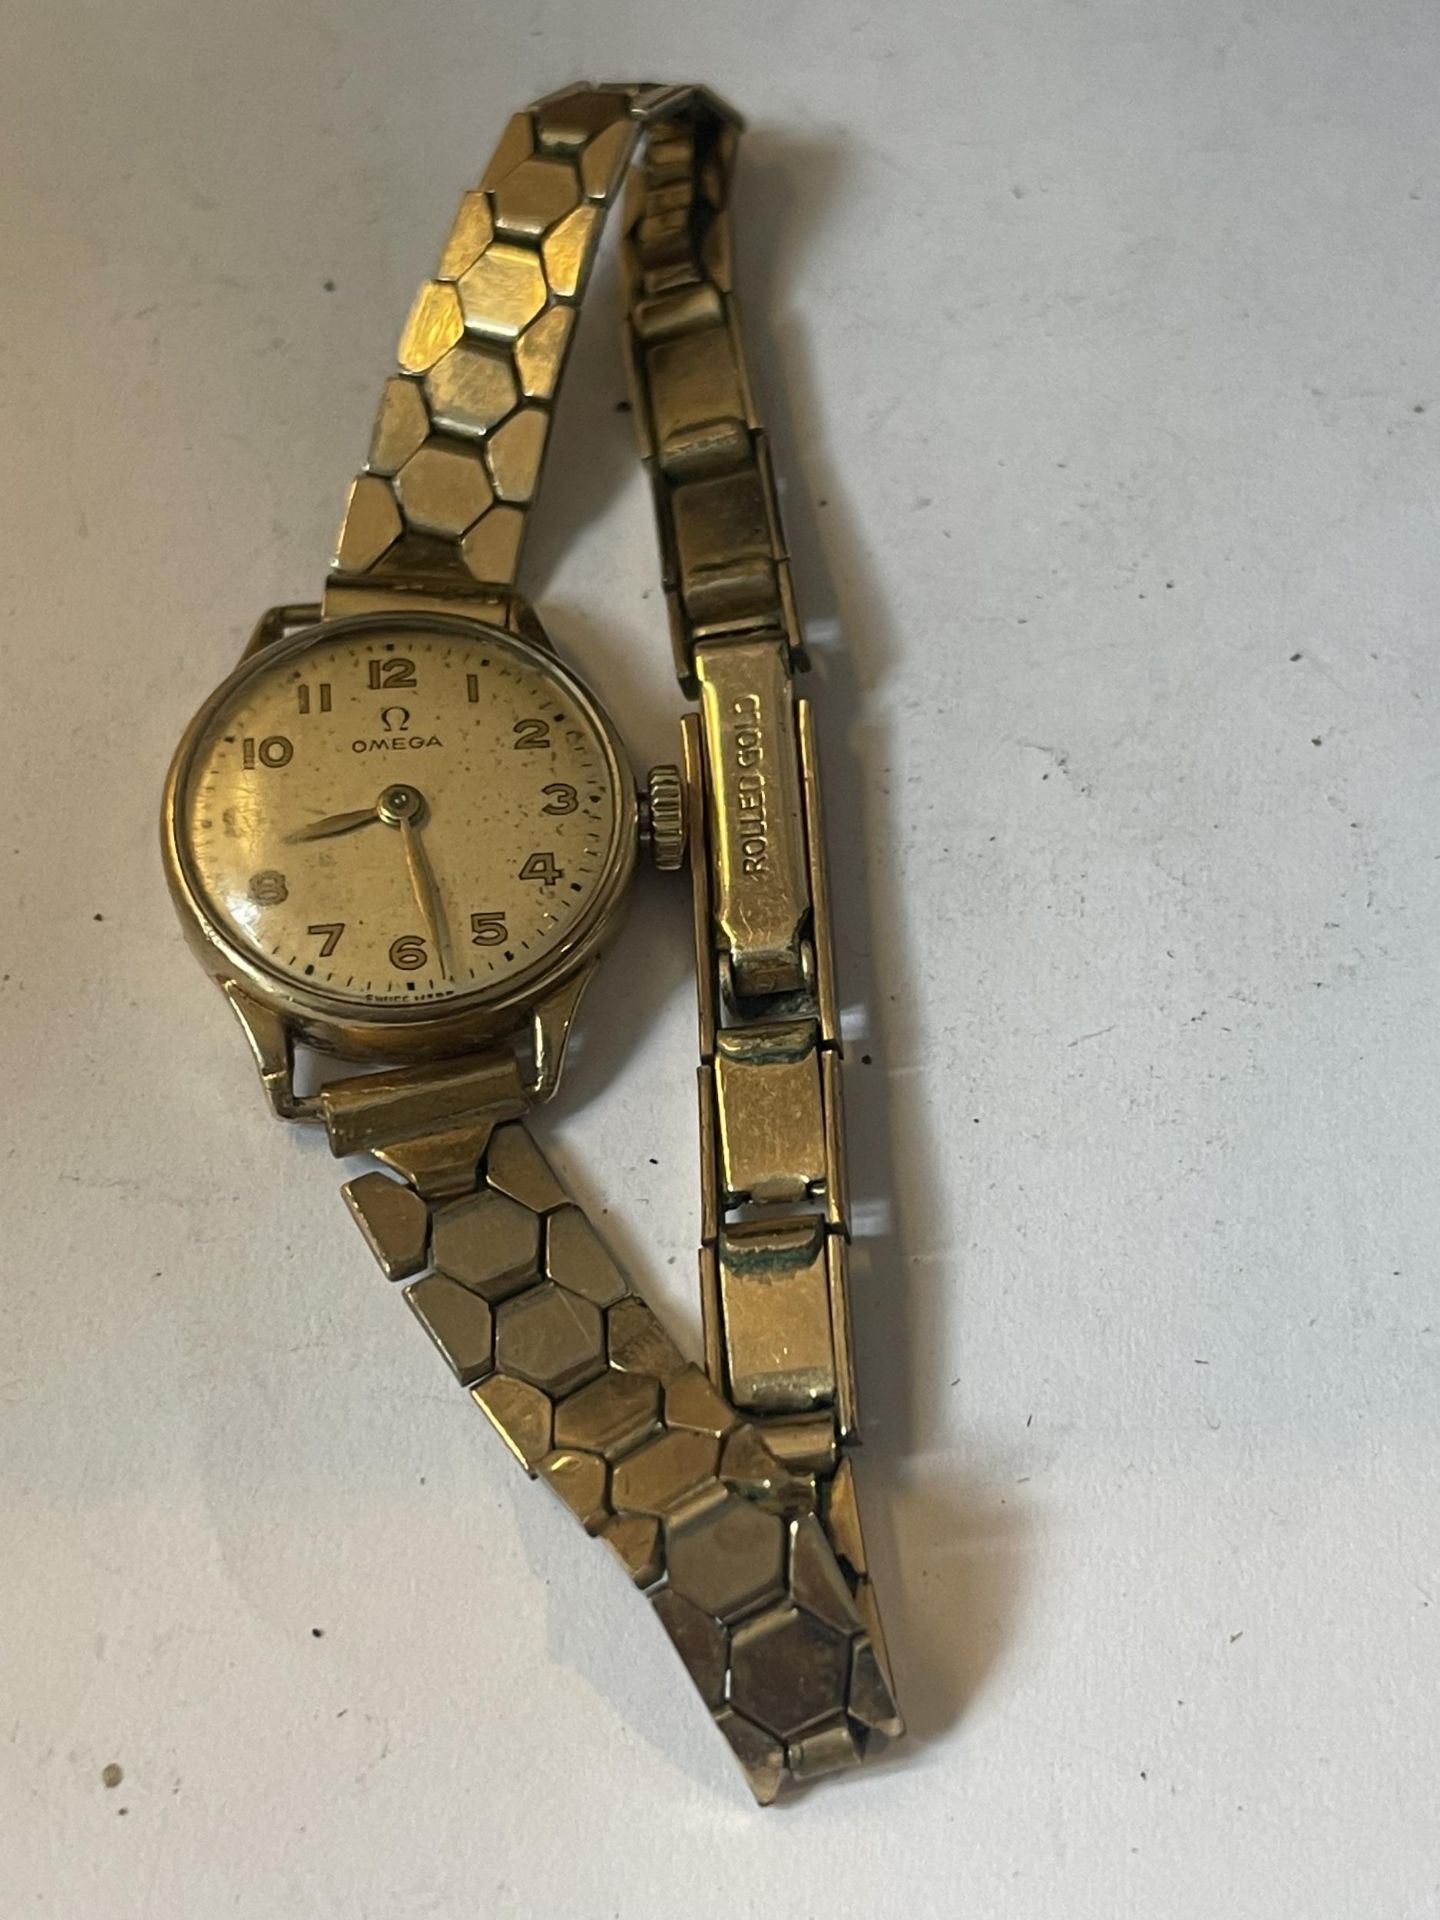 A LADIES OMEGA 9 CARAT GOLD WRIST WATCH WITH ROLLED GOLD STRAP IN ORIGINAL OMEGA CASE SEEN WORKING - Image 4 of 5